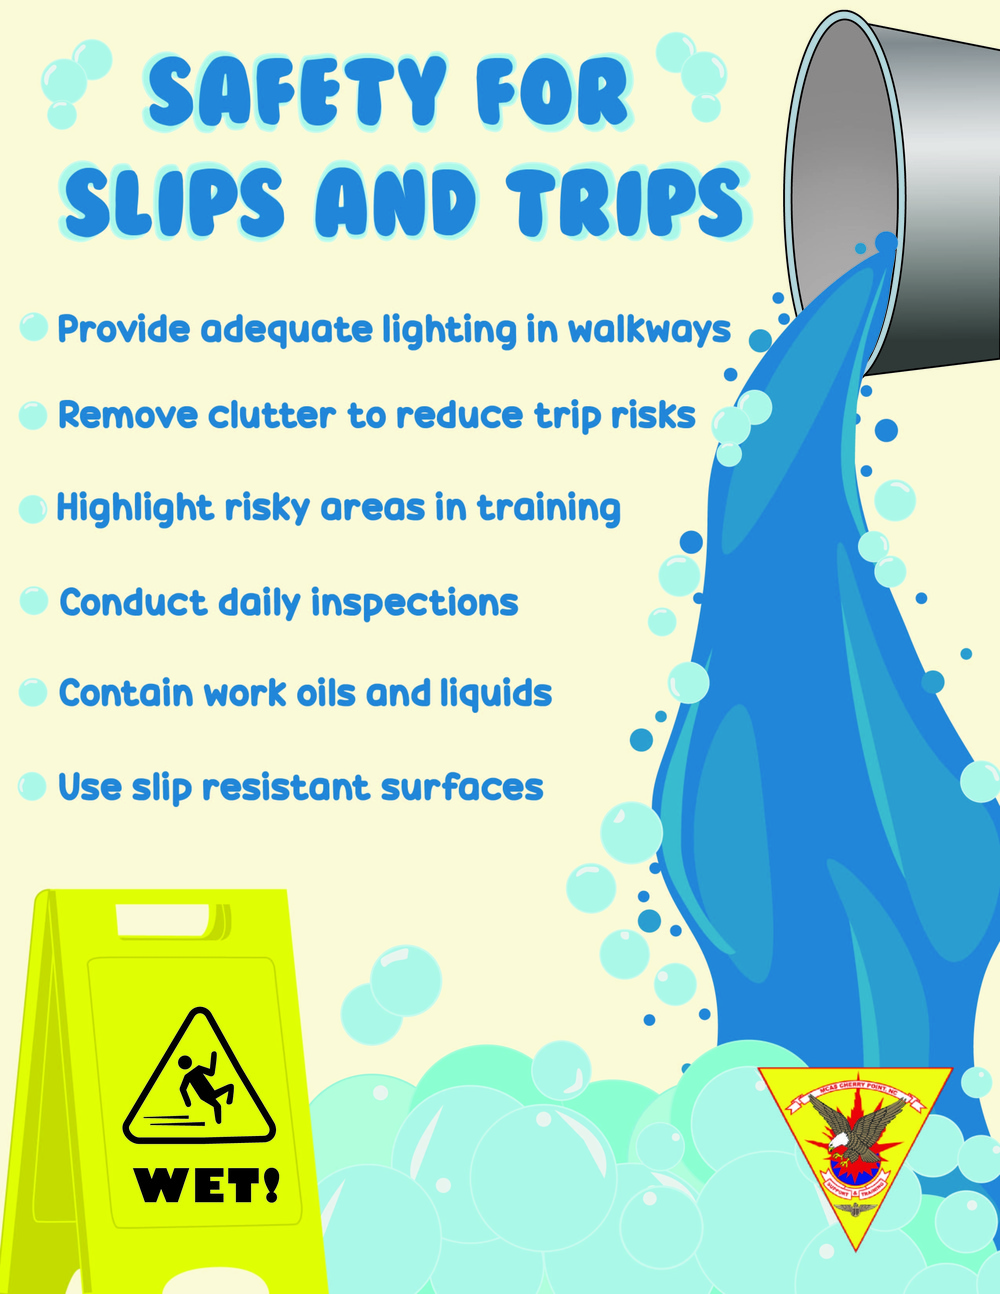 Safety Tips for Slips and Trips